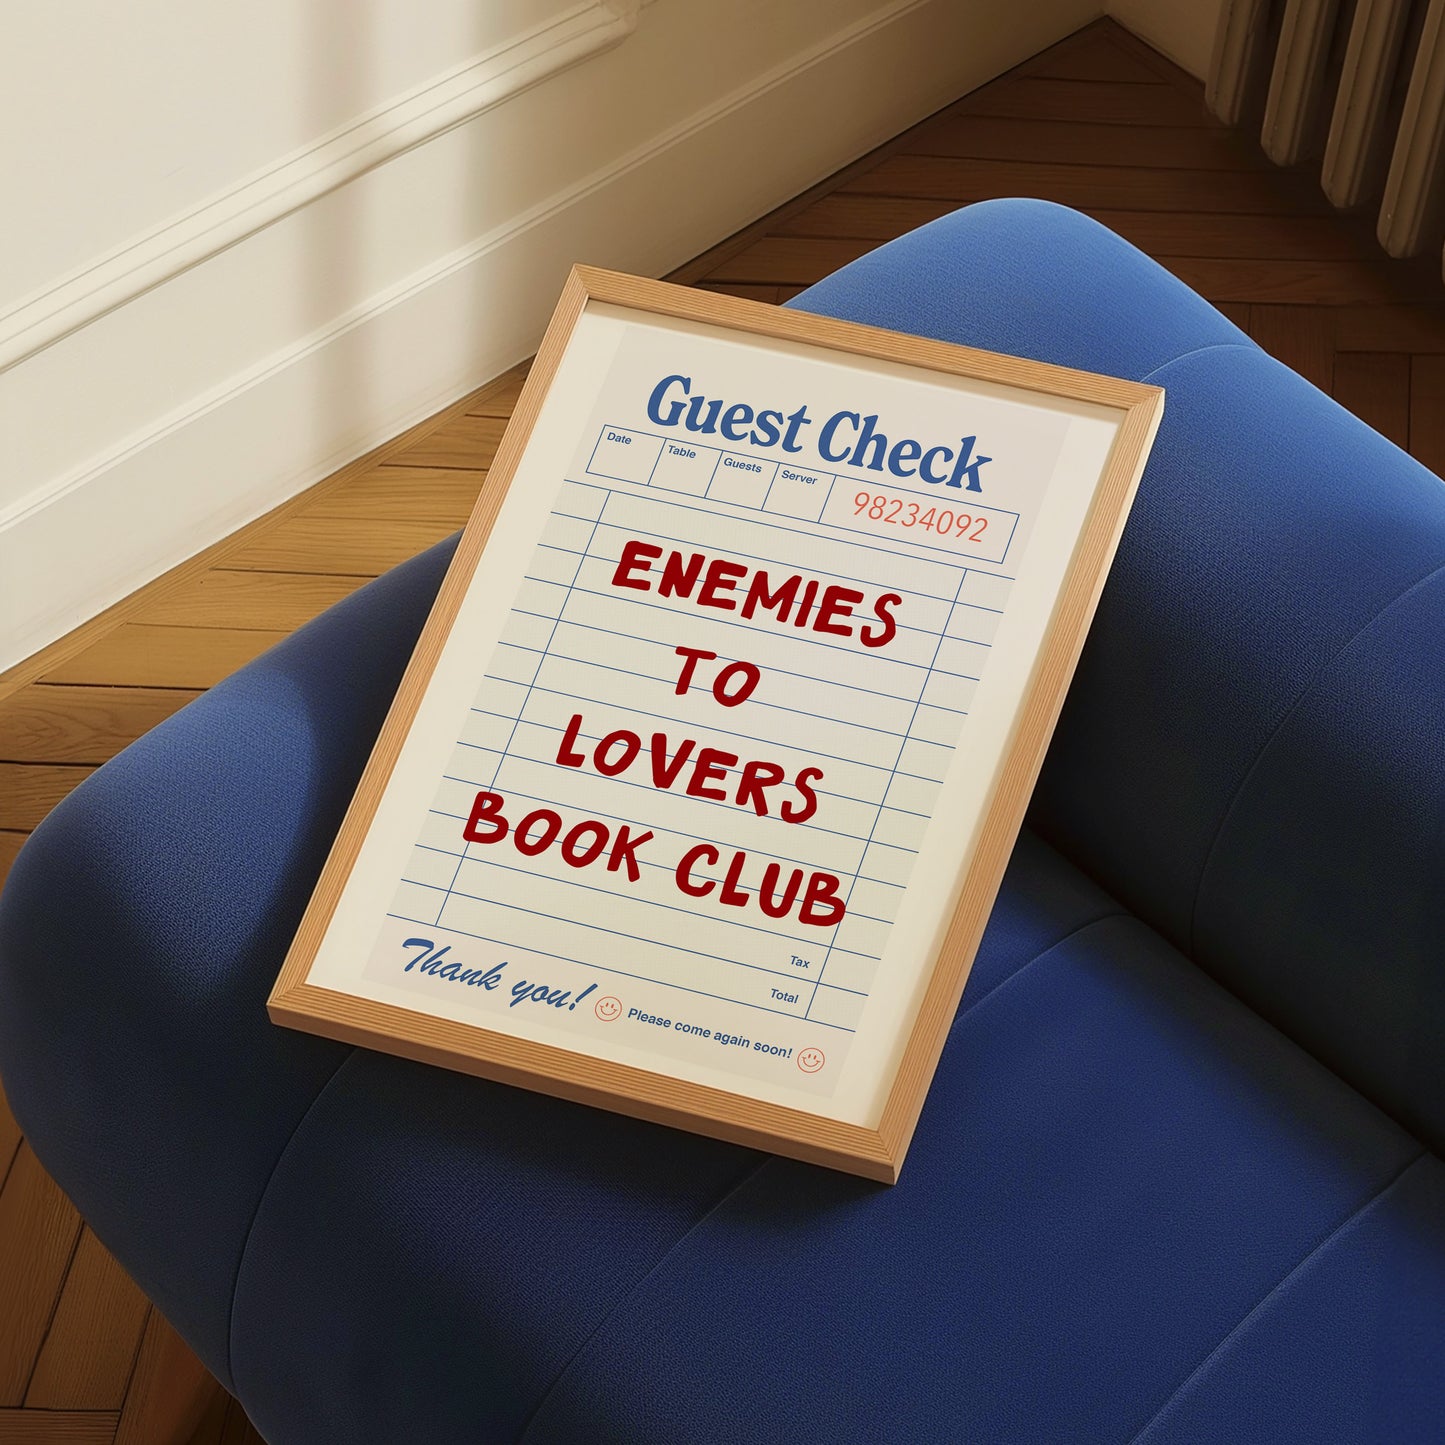 Enemies to Lovers Book Club Poster